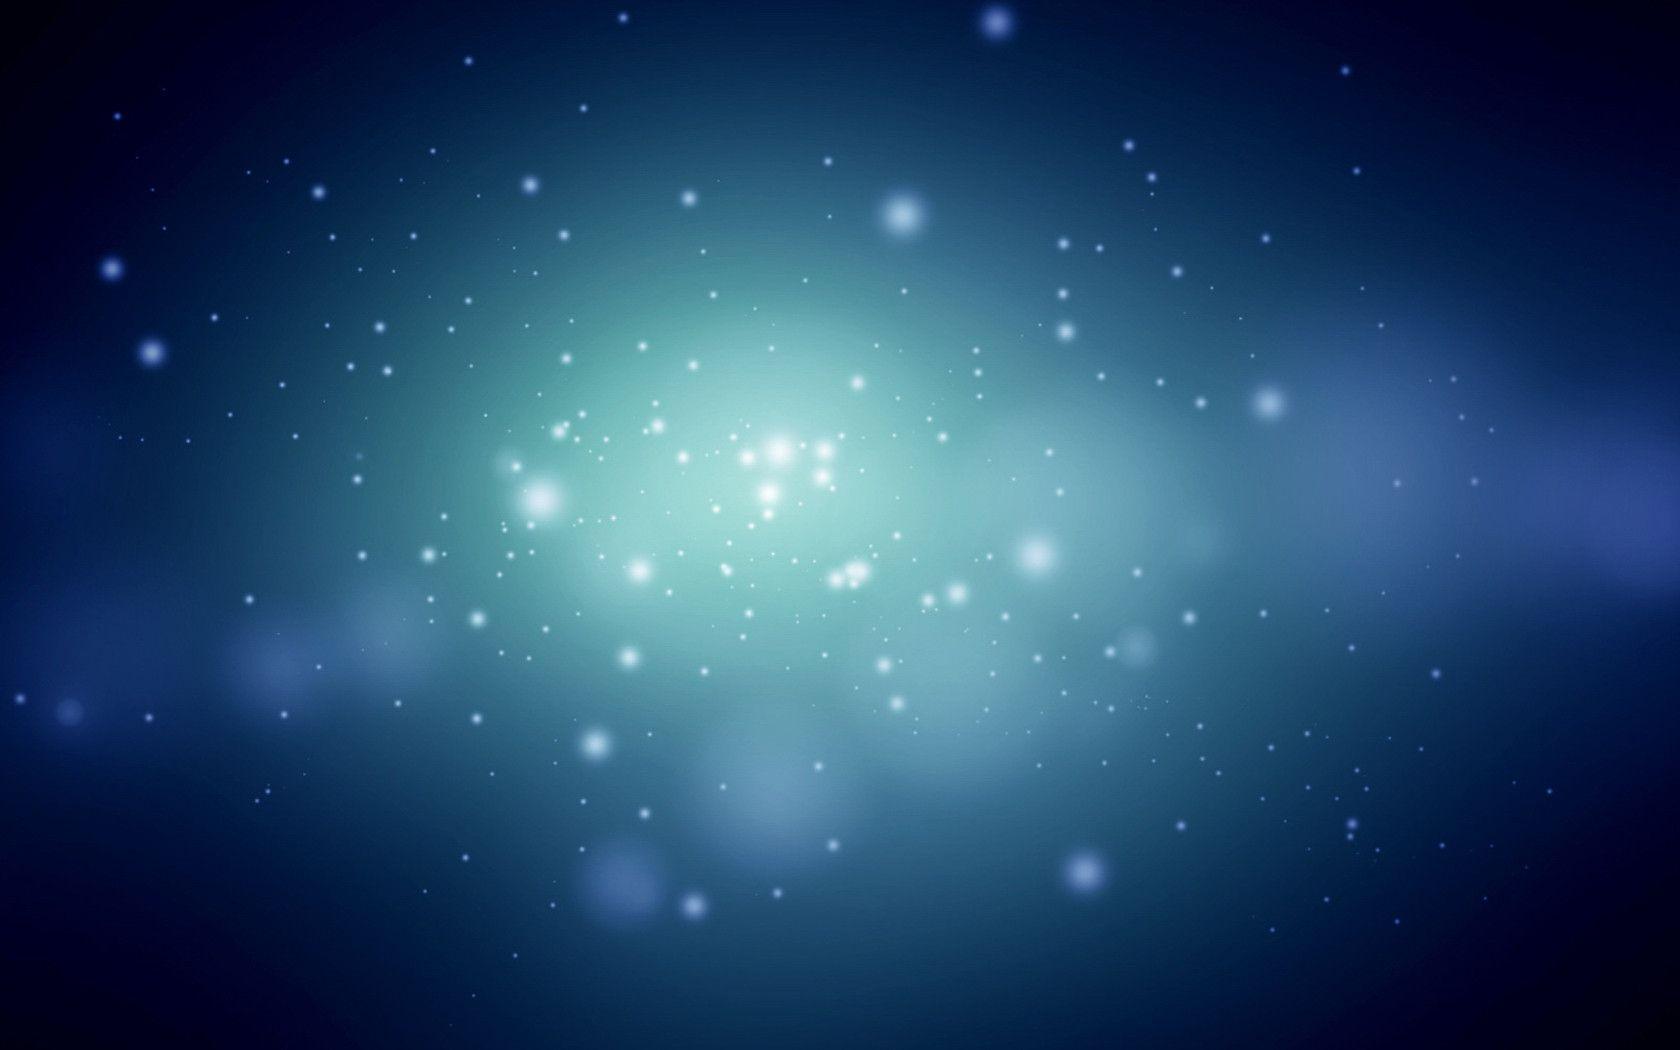 Free Stars In Space Background For PowerPoint